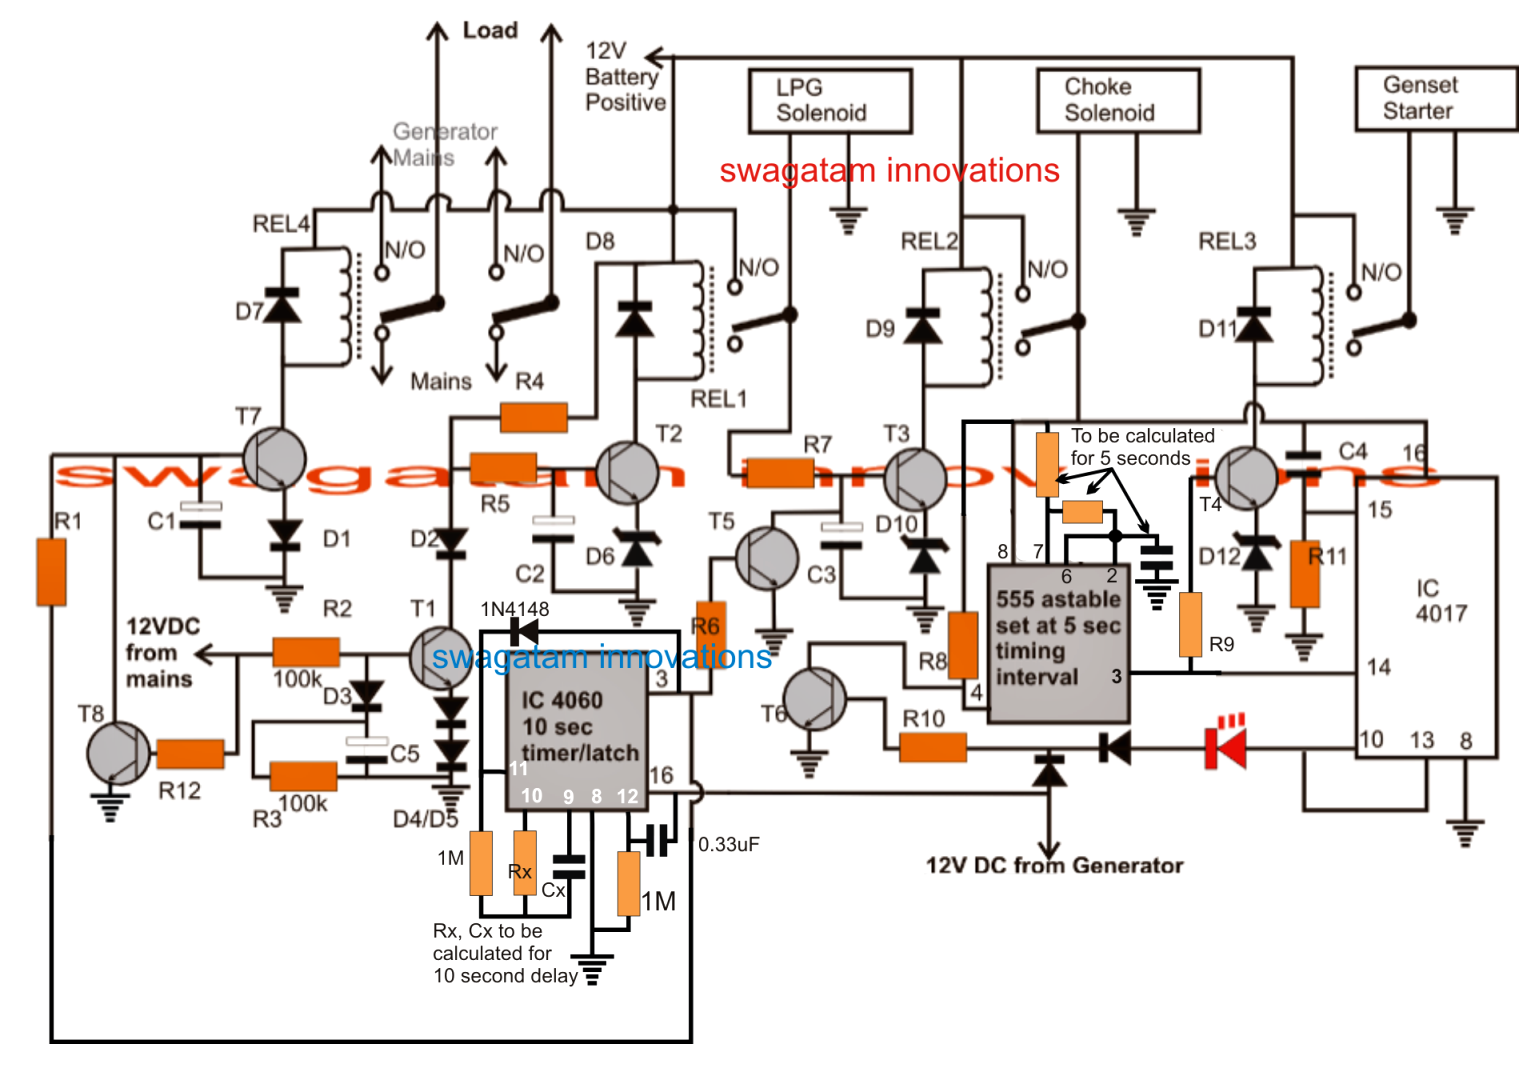 Automatic Transfer Switch (ATS) Circuit